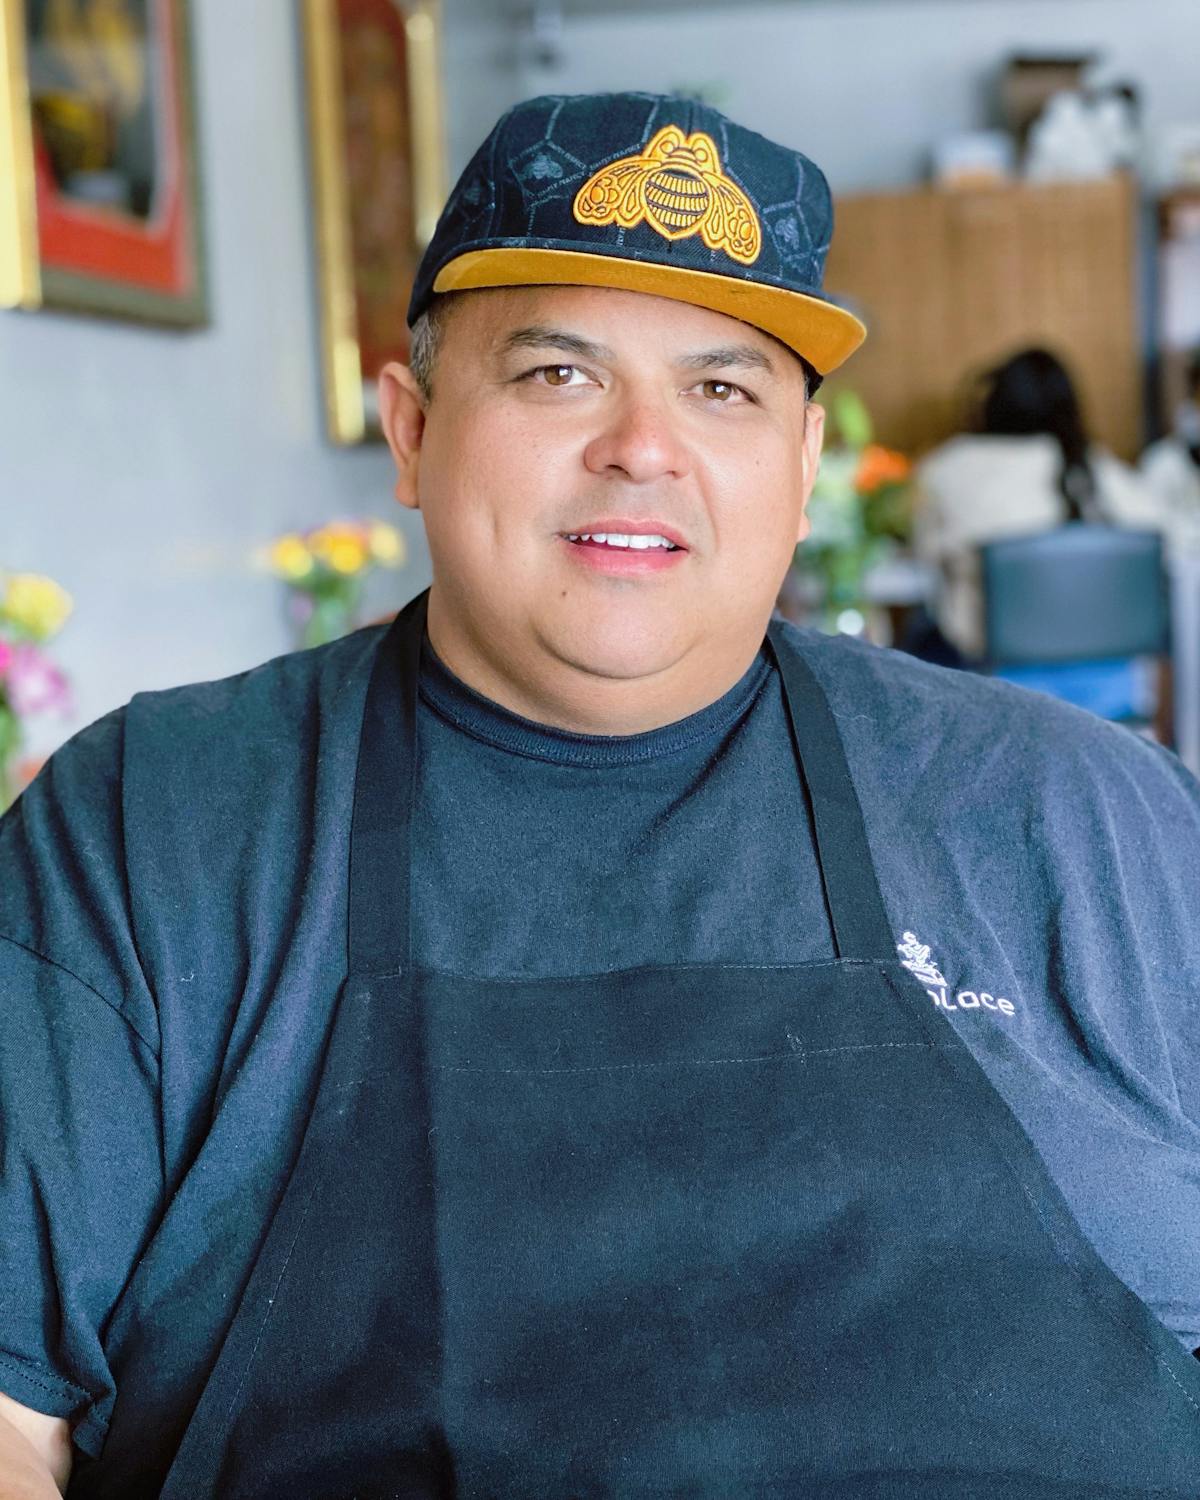 Chef smiling wearing an apron and ballcap